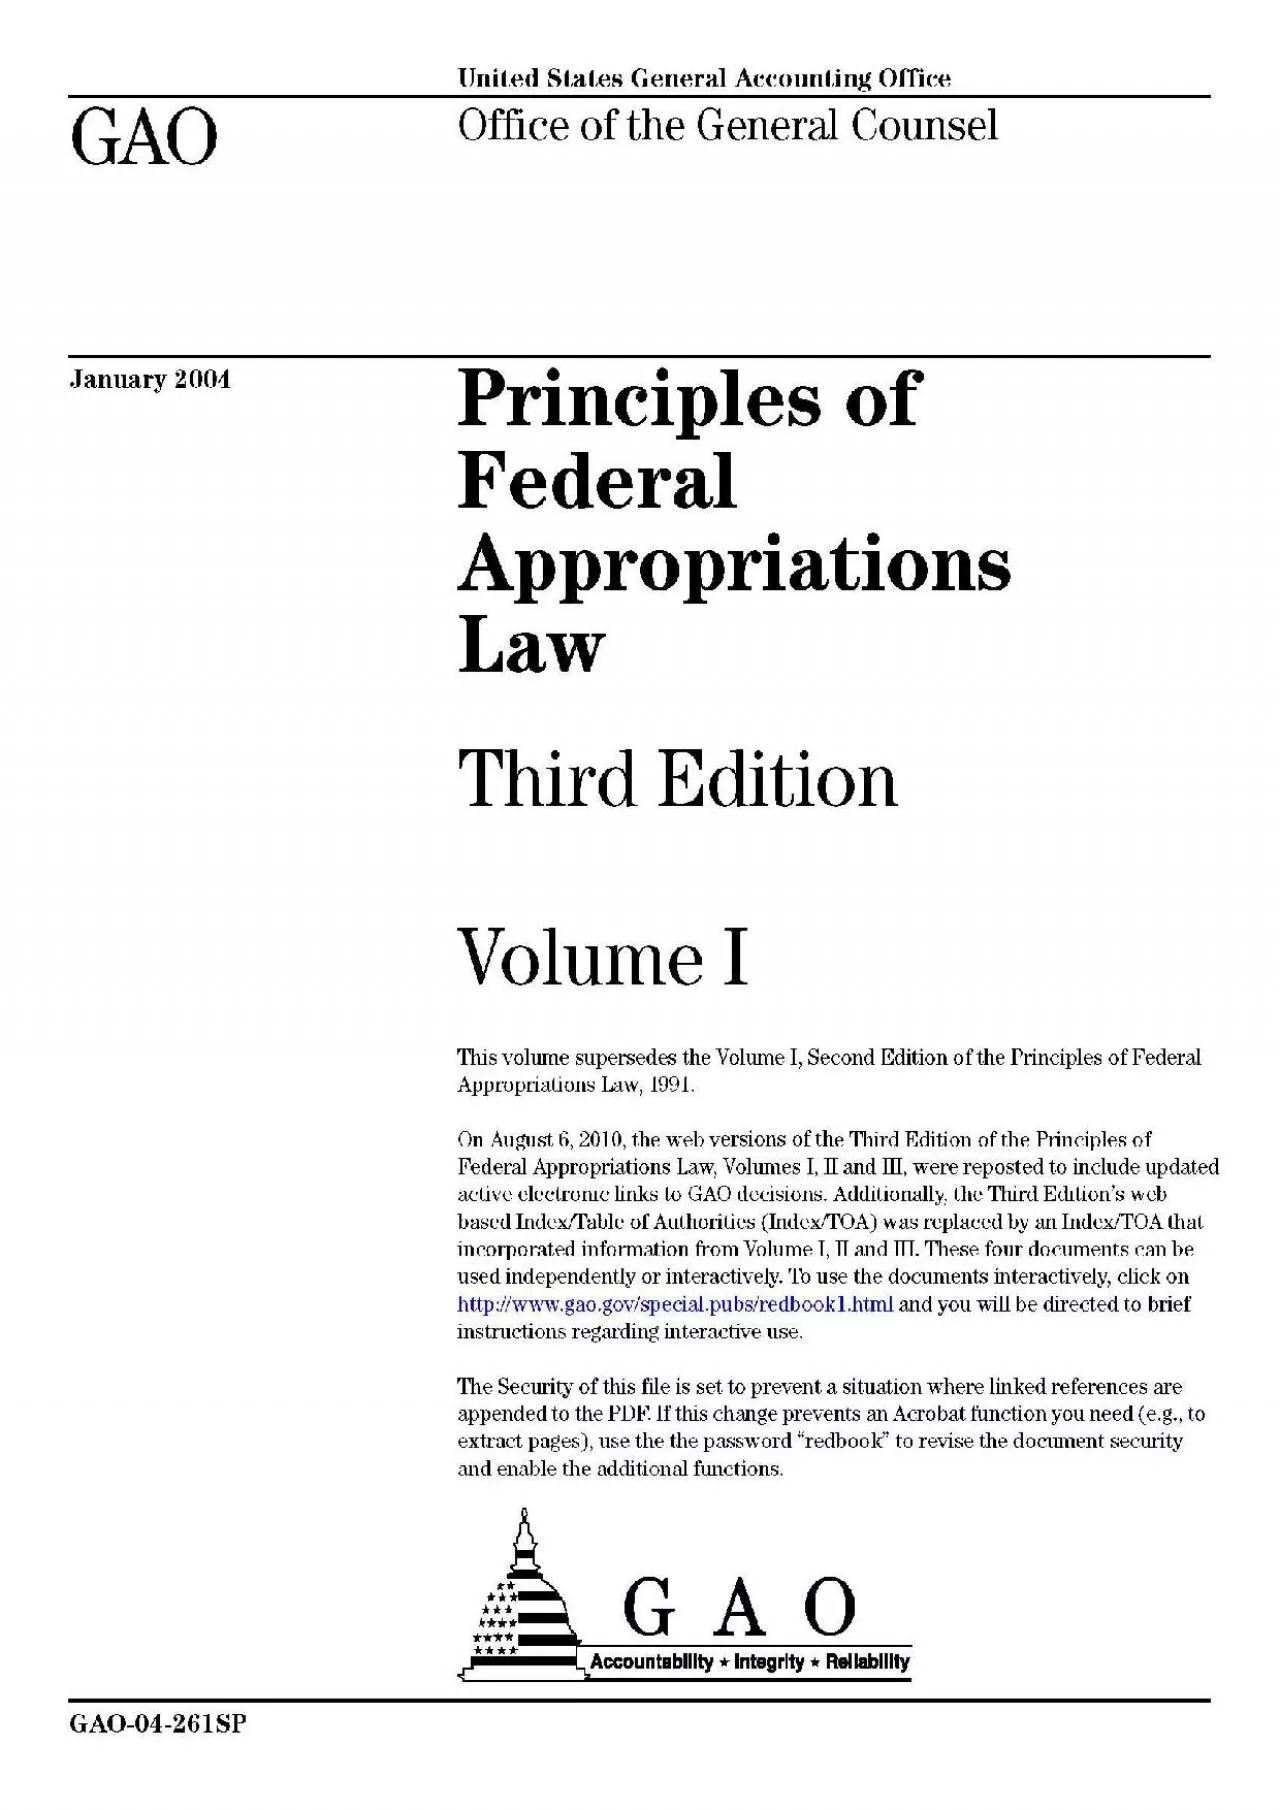 GAO Red Book Principles of Federal Appropriations Law 3rd Edition Volume 1